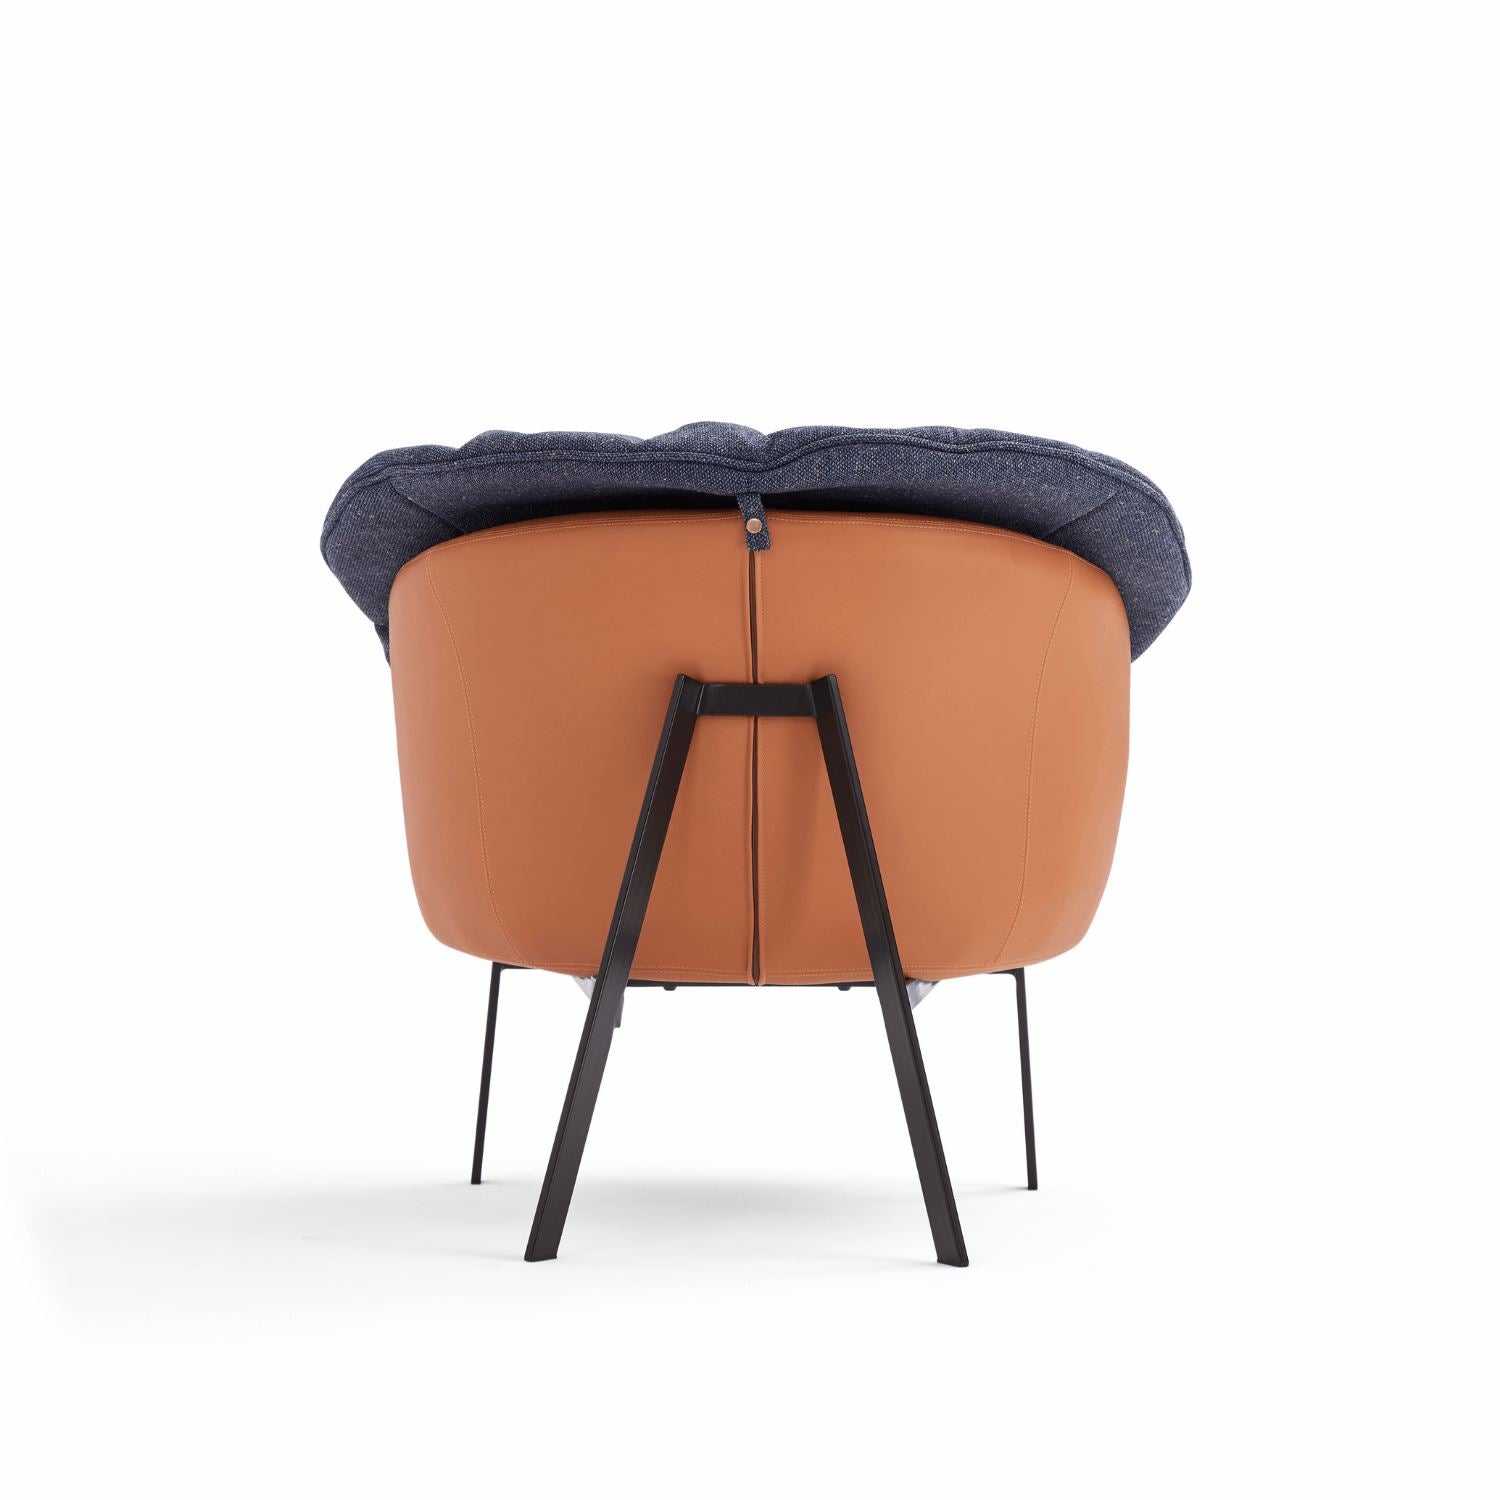 Valwazz Accent Chair - Valyou 